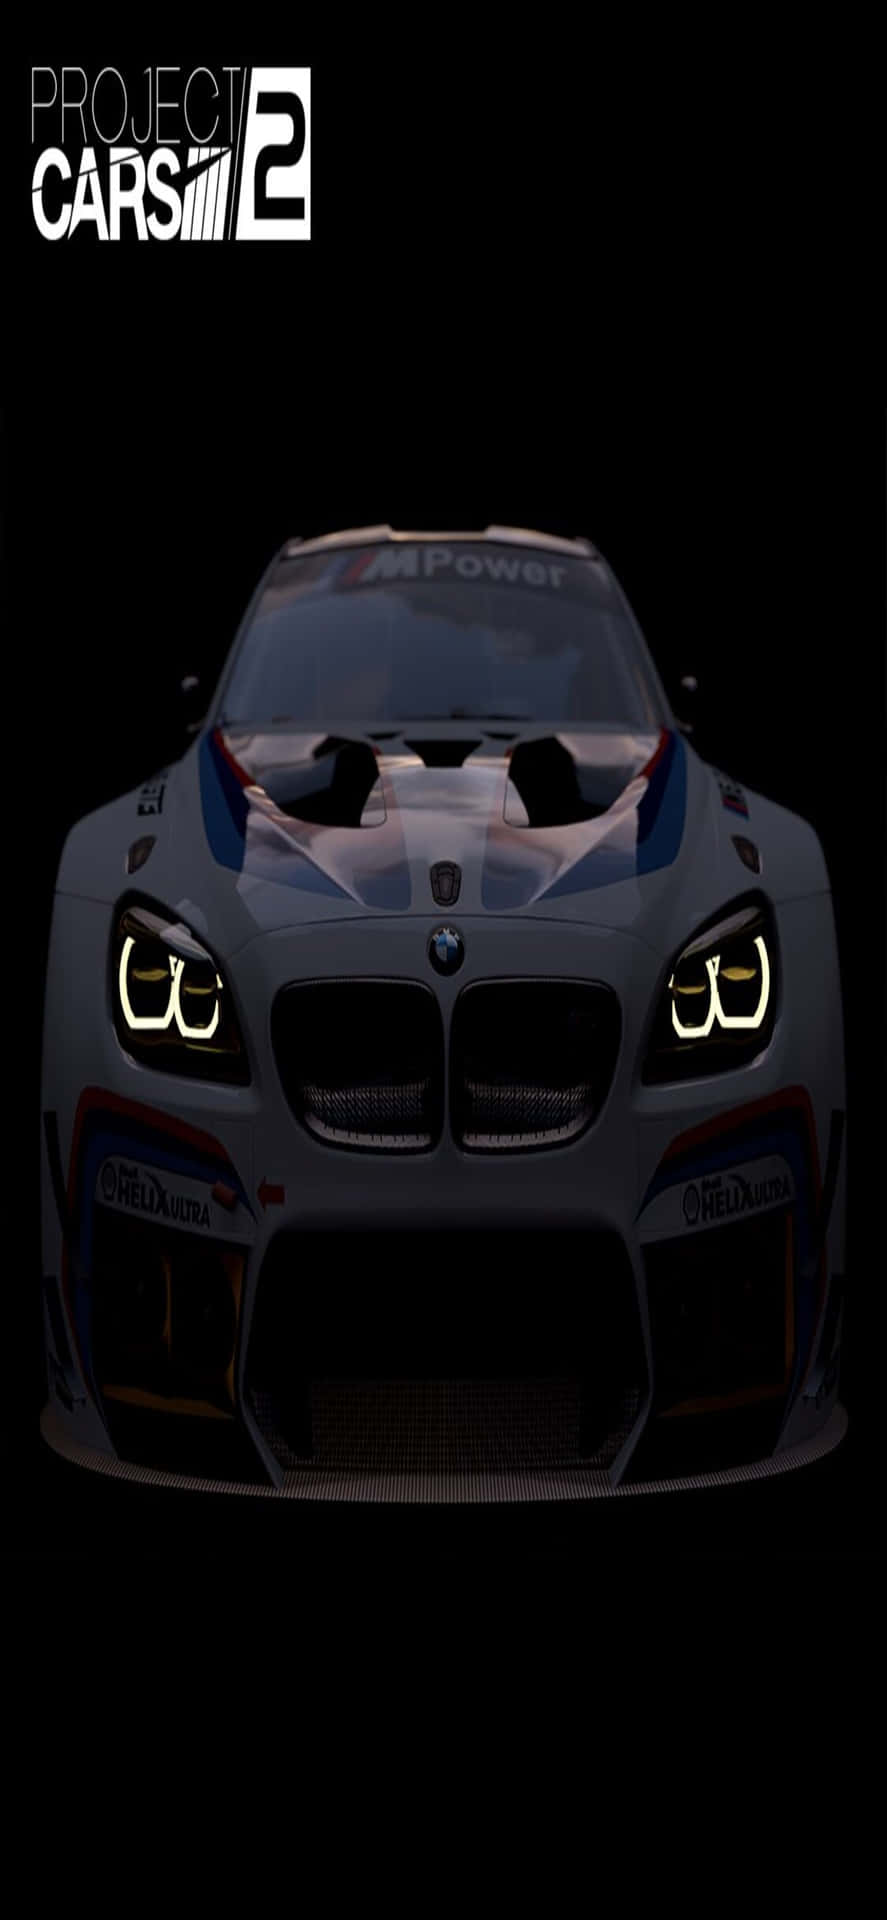 Proyectocars 2 - Bmw M6